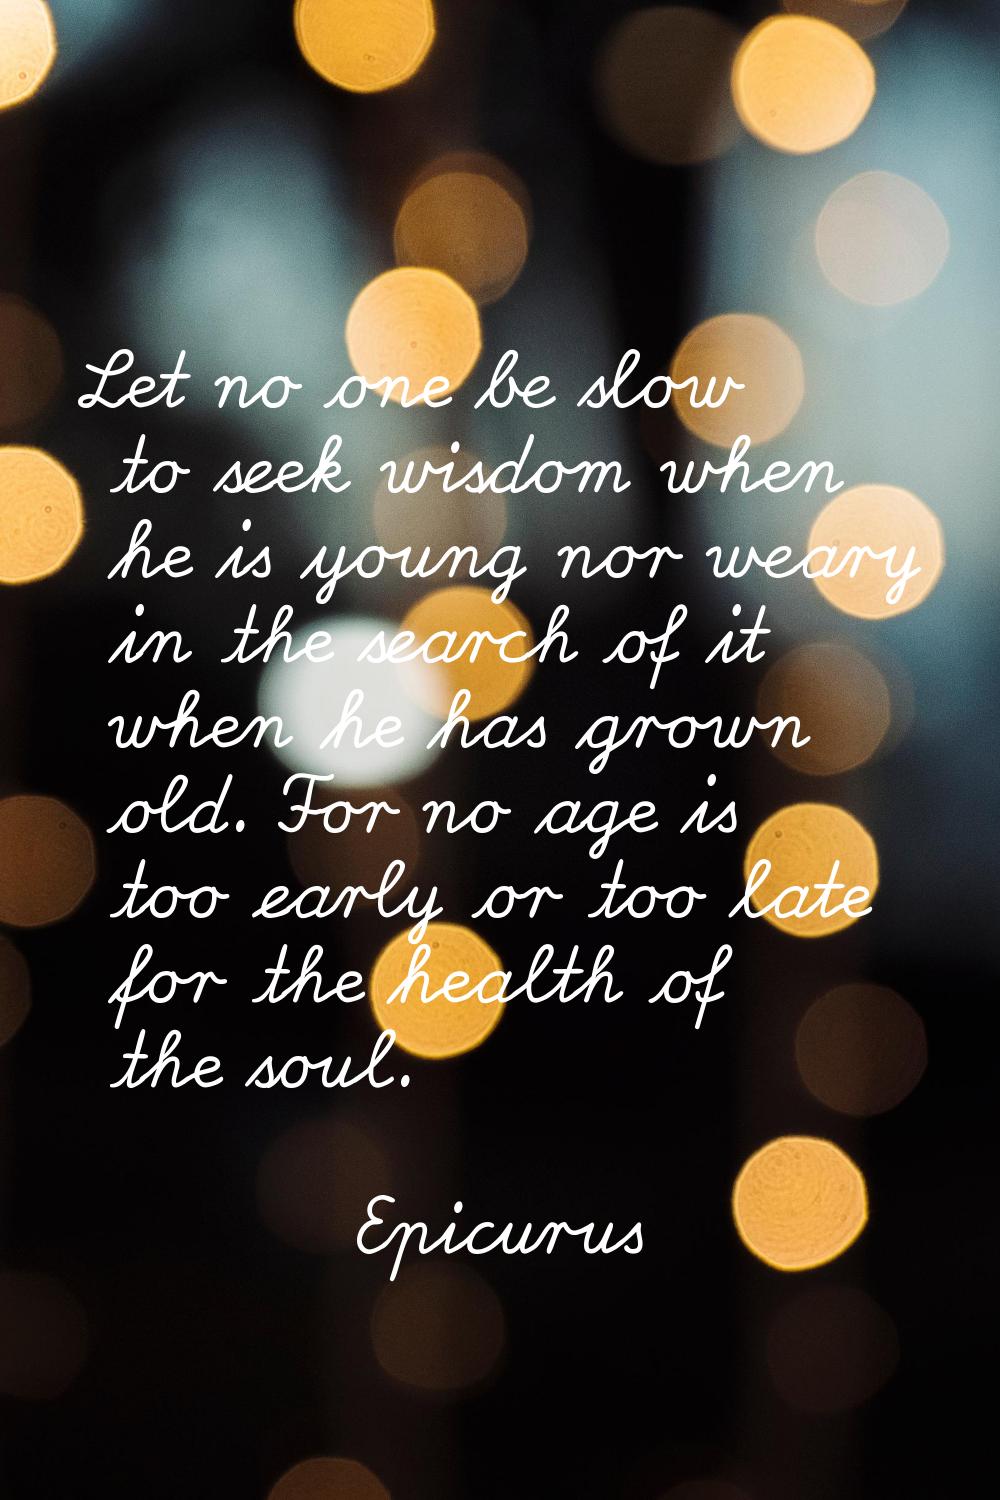 Let no one be slow to seek wisdom when he is young nor weary in the search of it when he has grown 